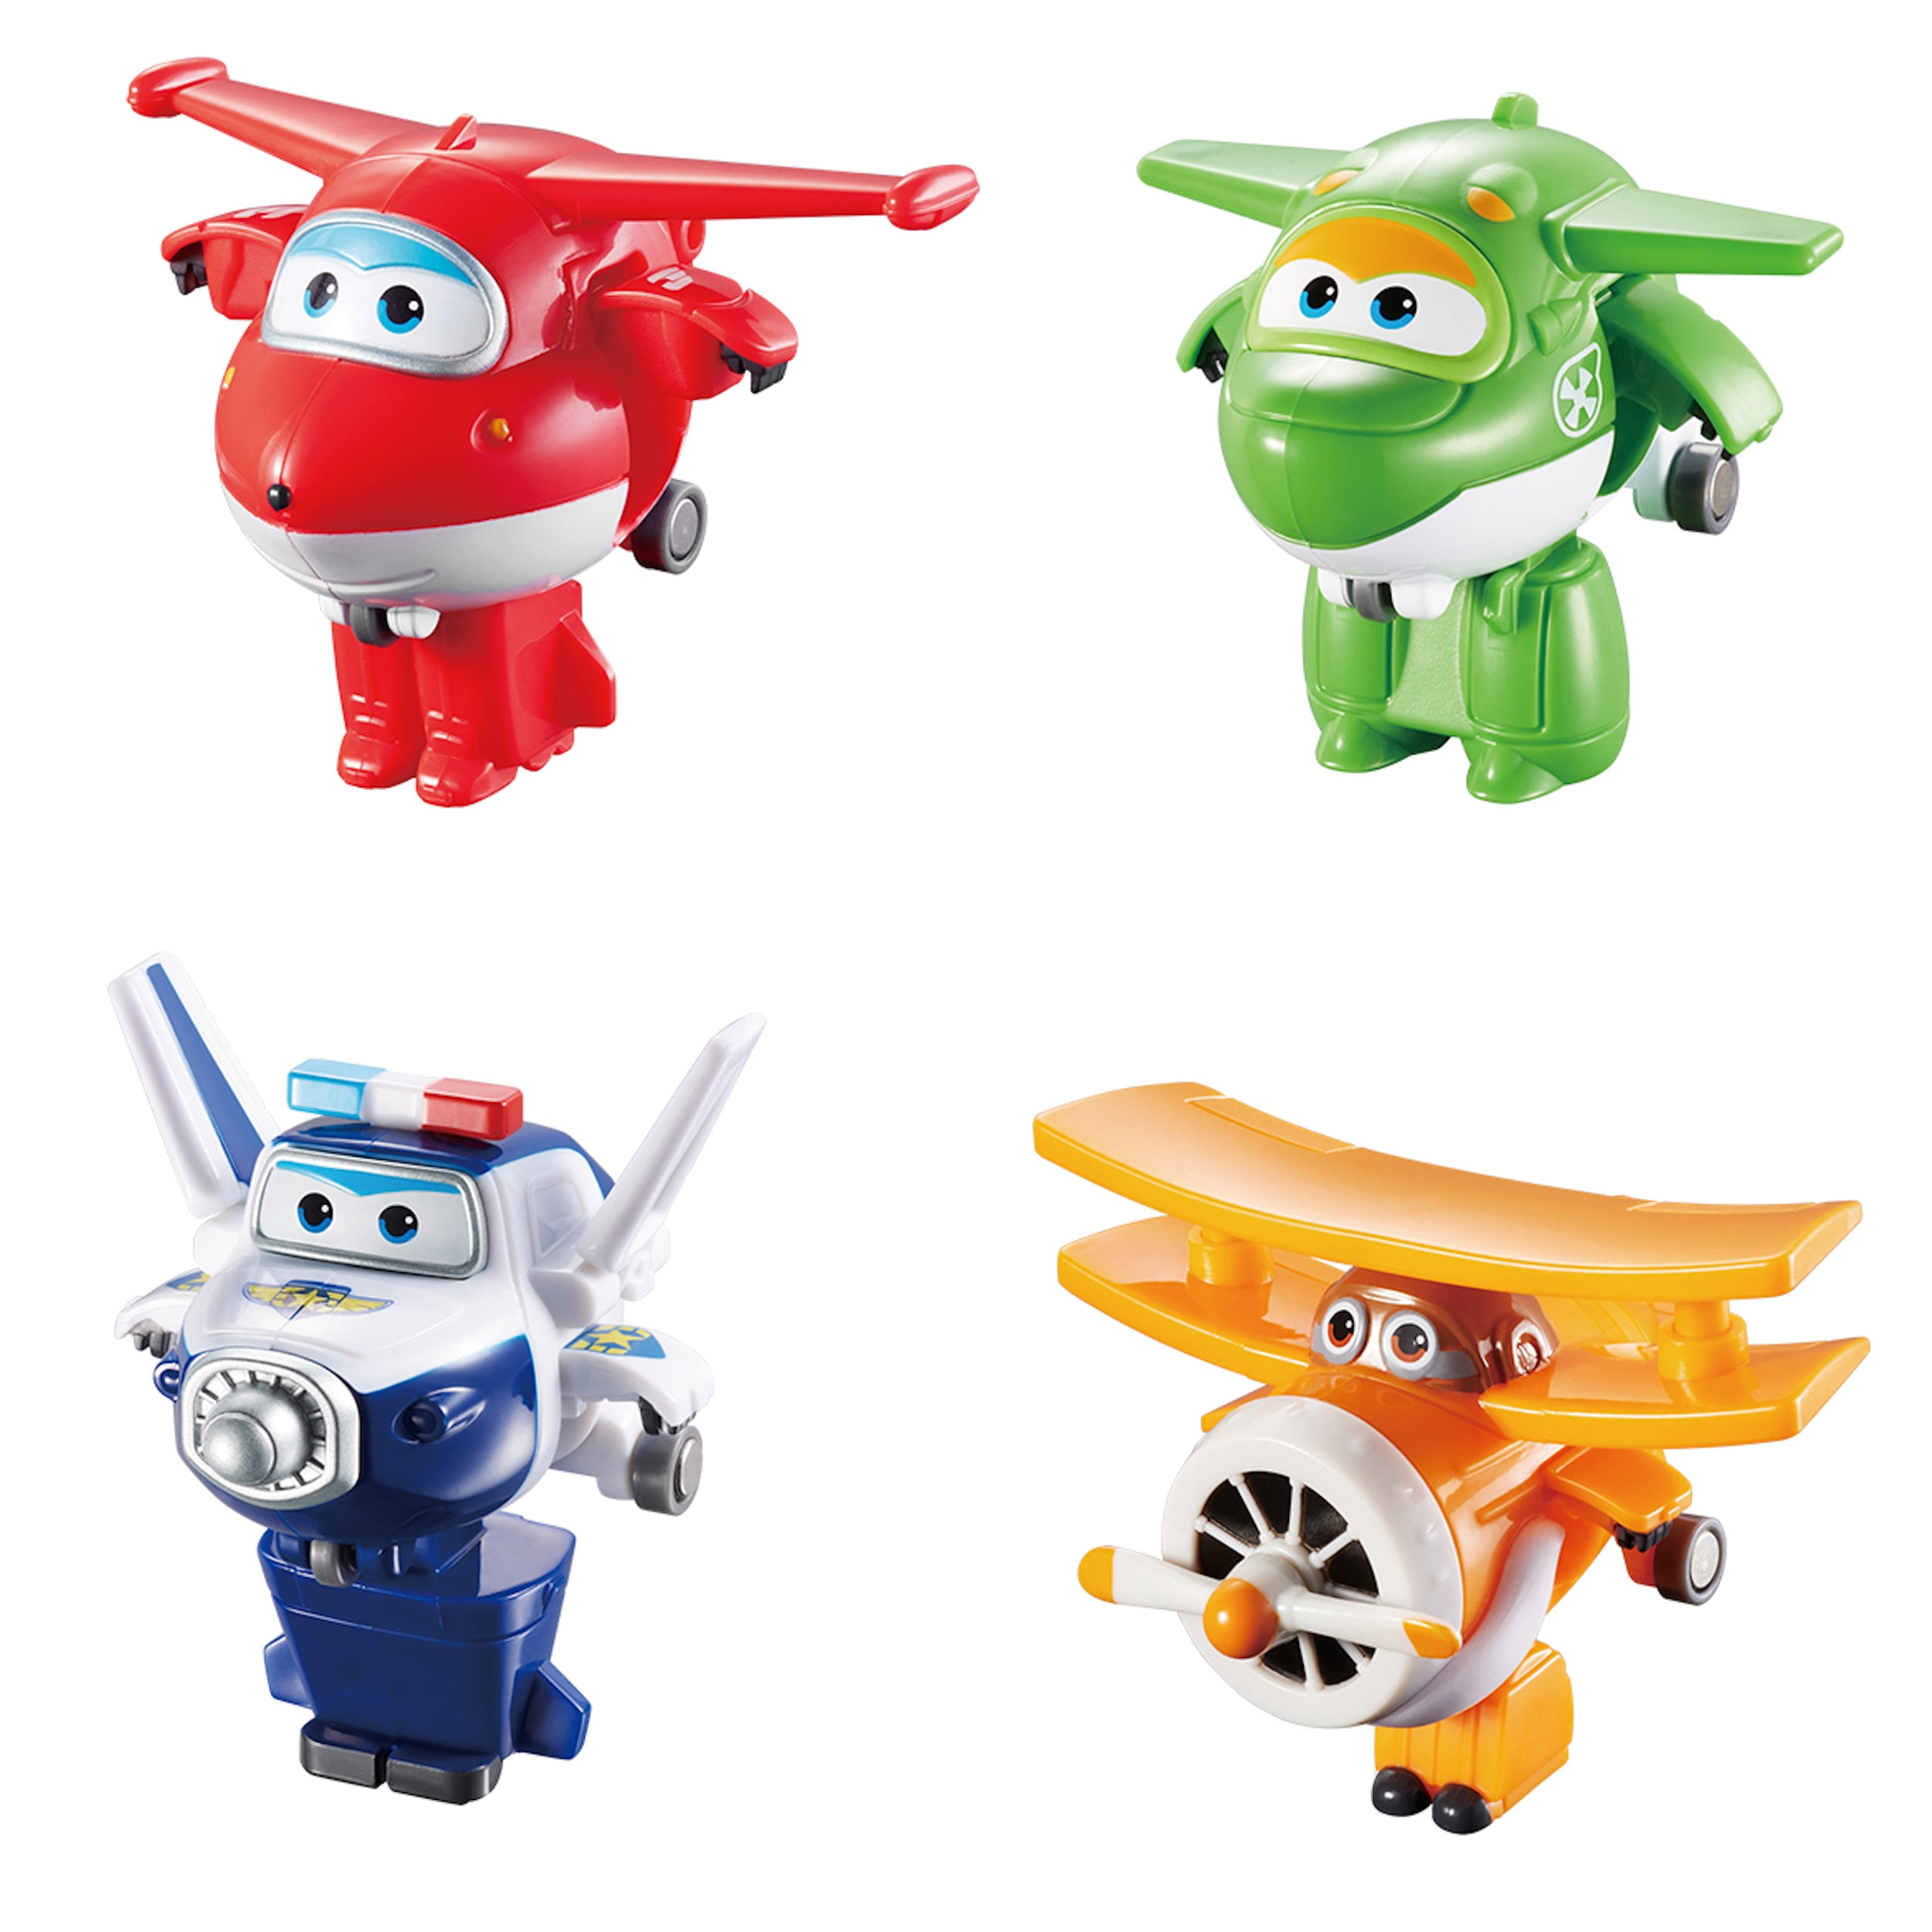 Super Wings Robot Vehicle Playset Animation Character Toy Kids Xmas Gift 